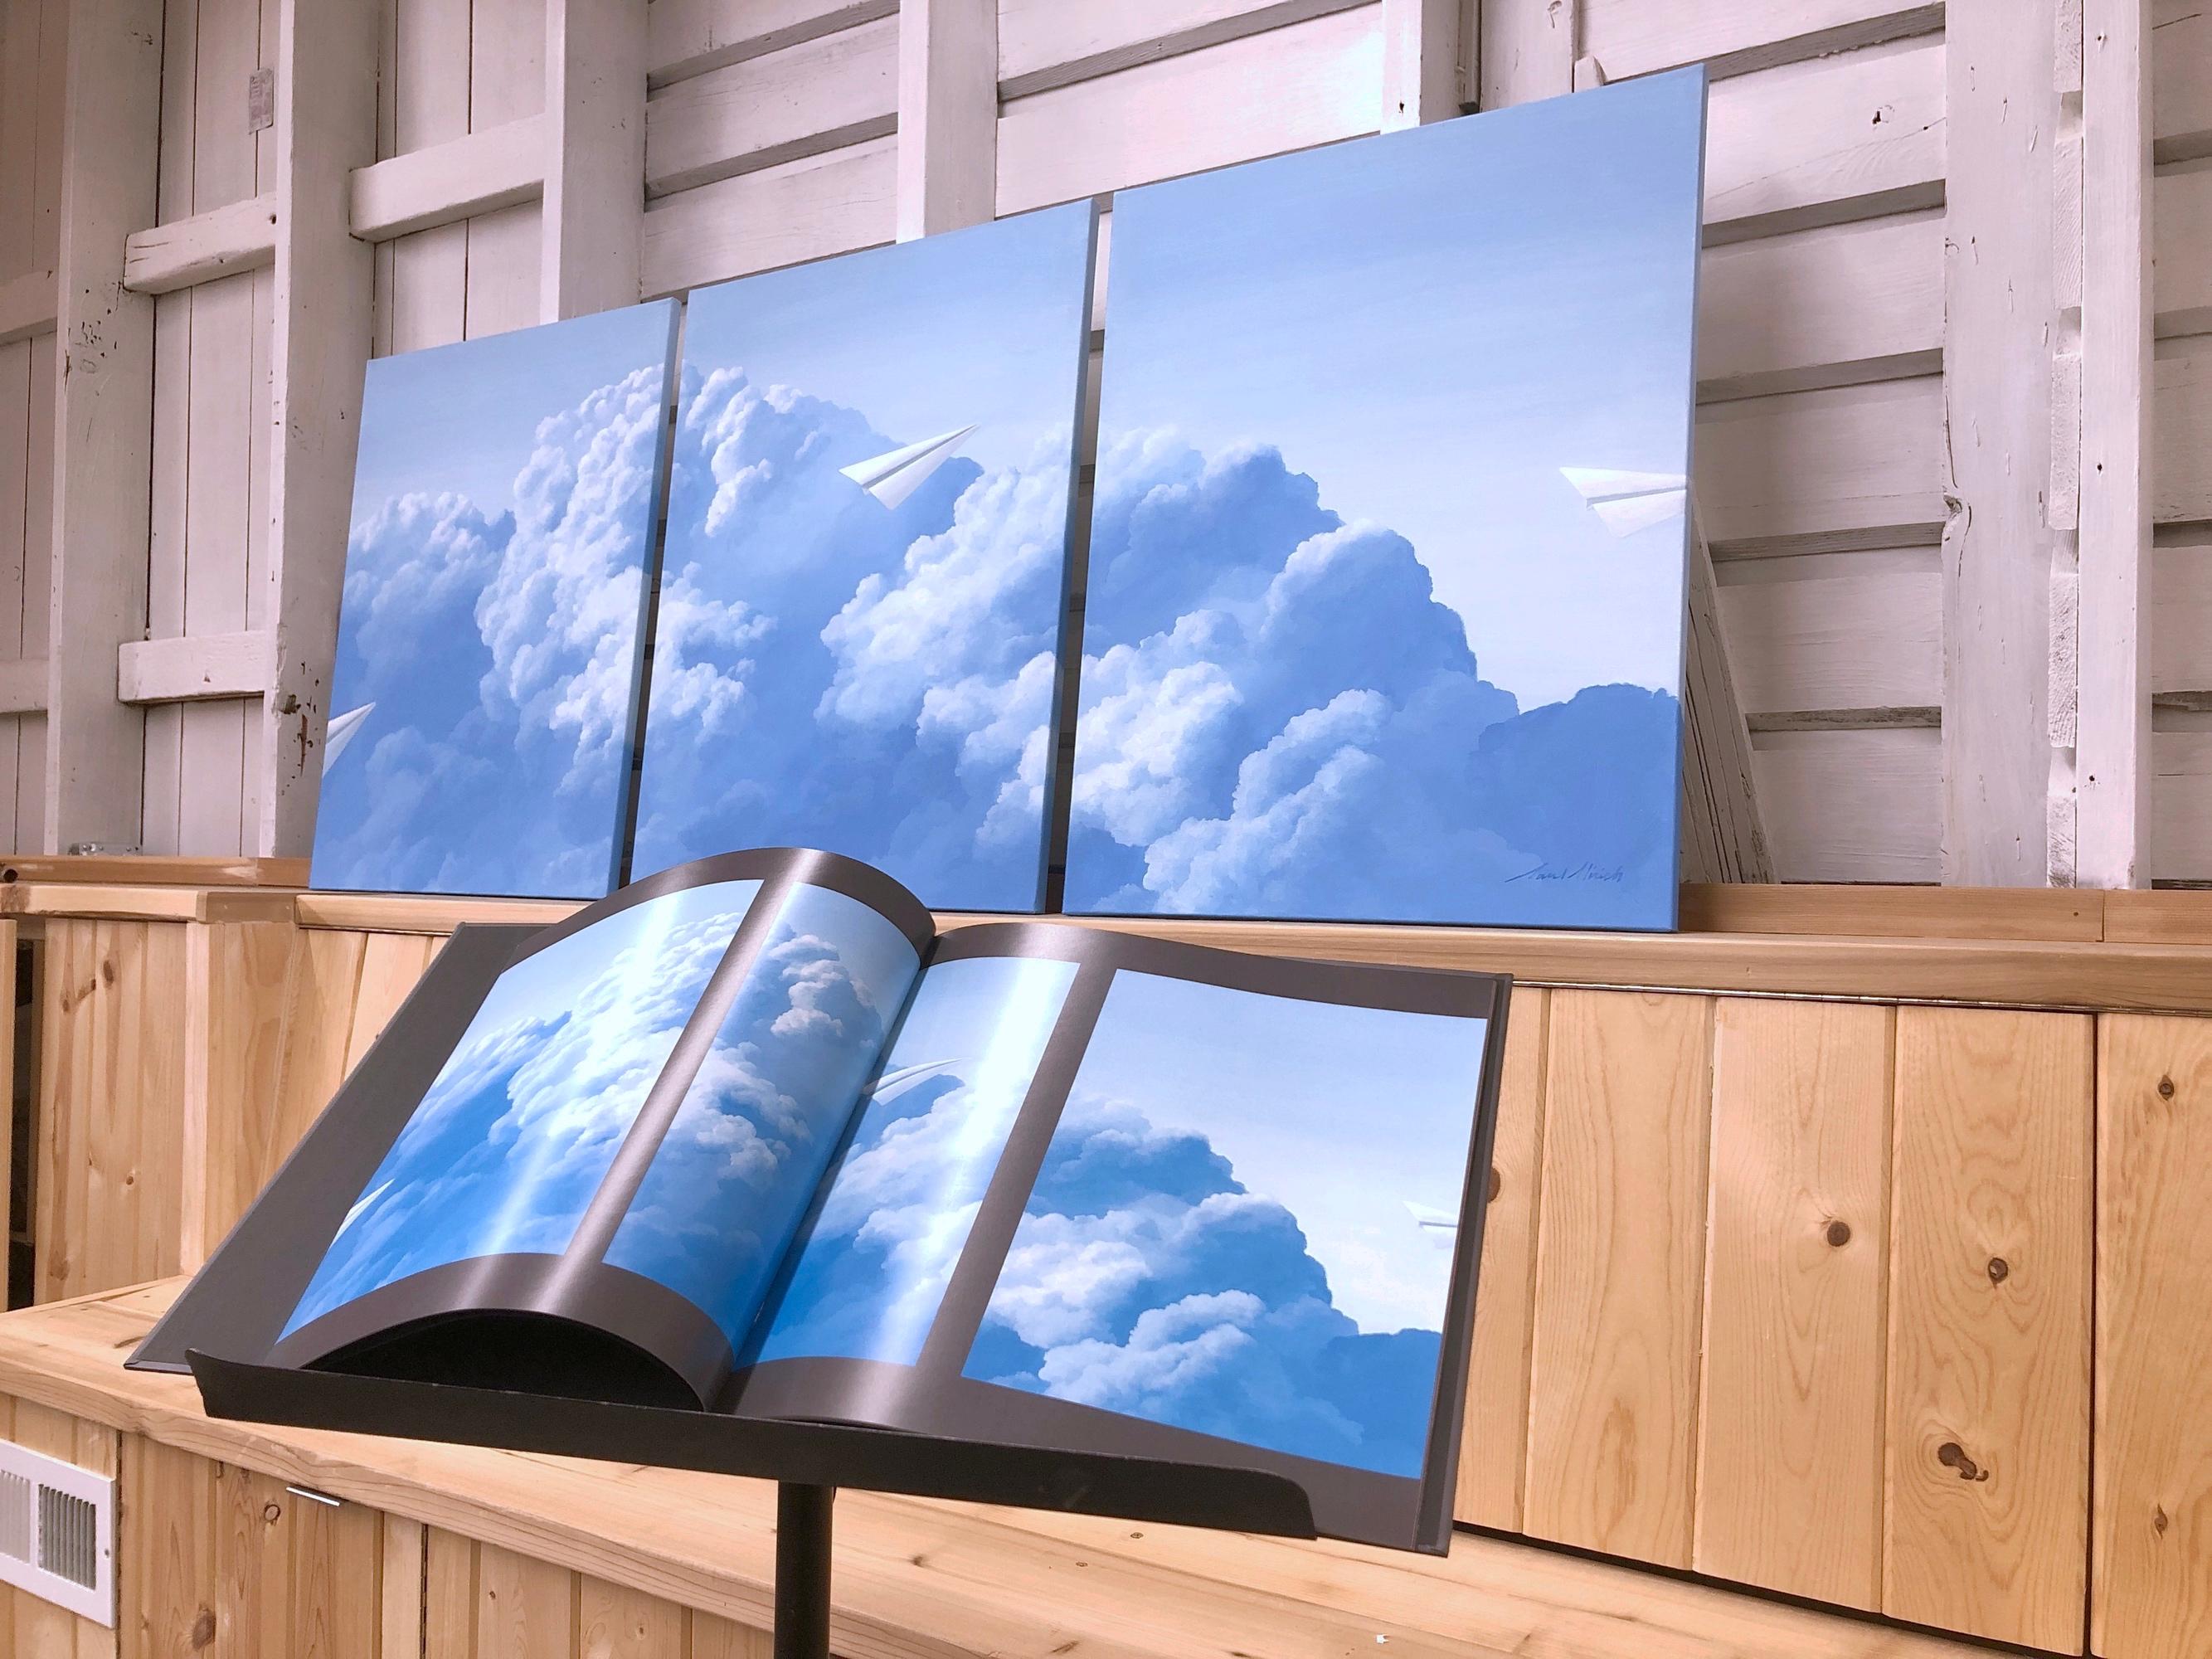 From Paul Micich's 'Paper Airplane' series, this acrylic and alkyd triptych painting on canvas features a paper airplane in flight through cumulous clouds. The sky blue atmosphere with the billowing clouds evokes thoughts from the viewer of plane